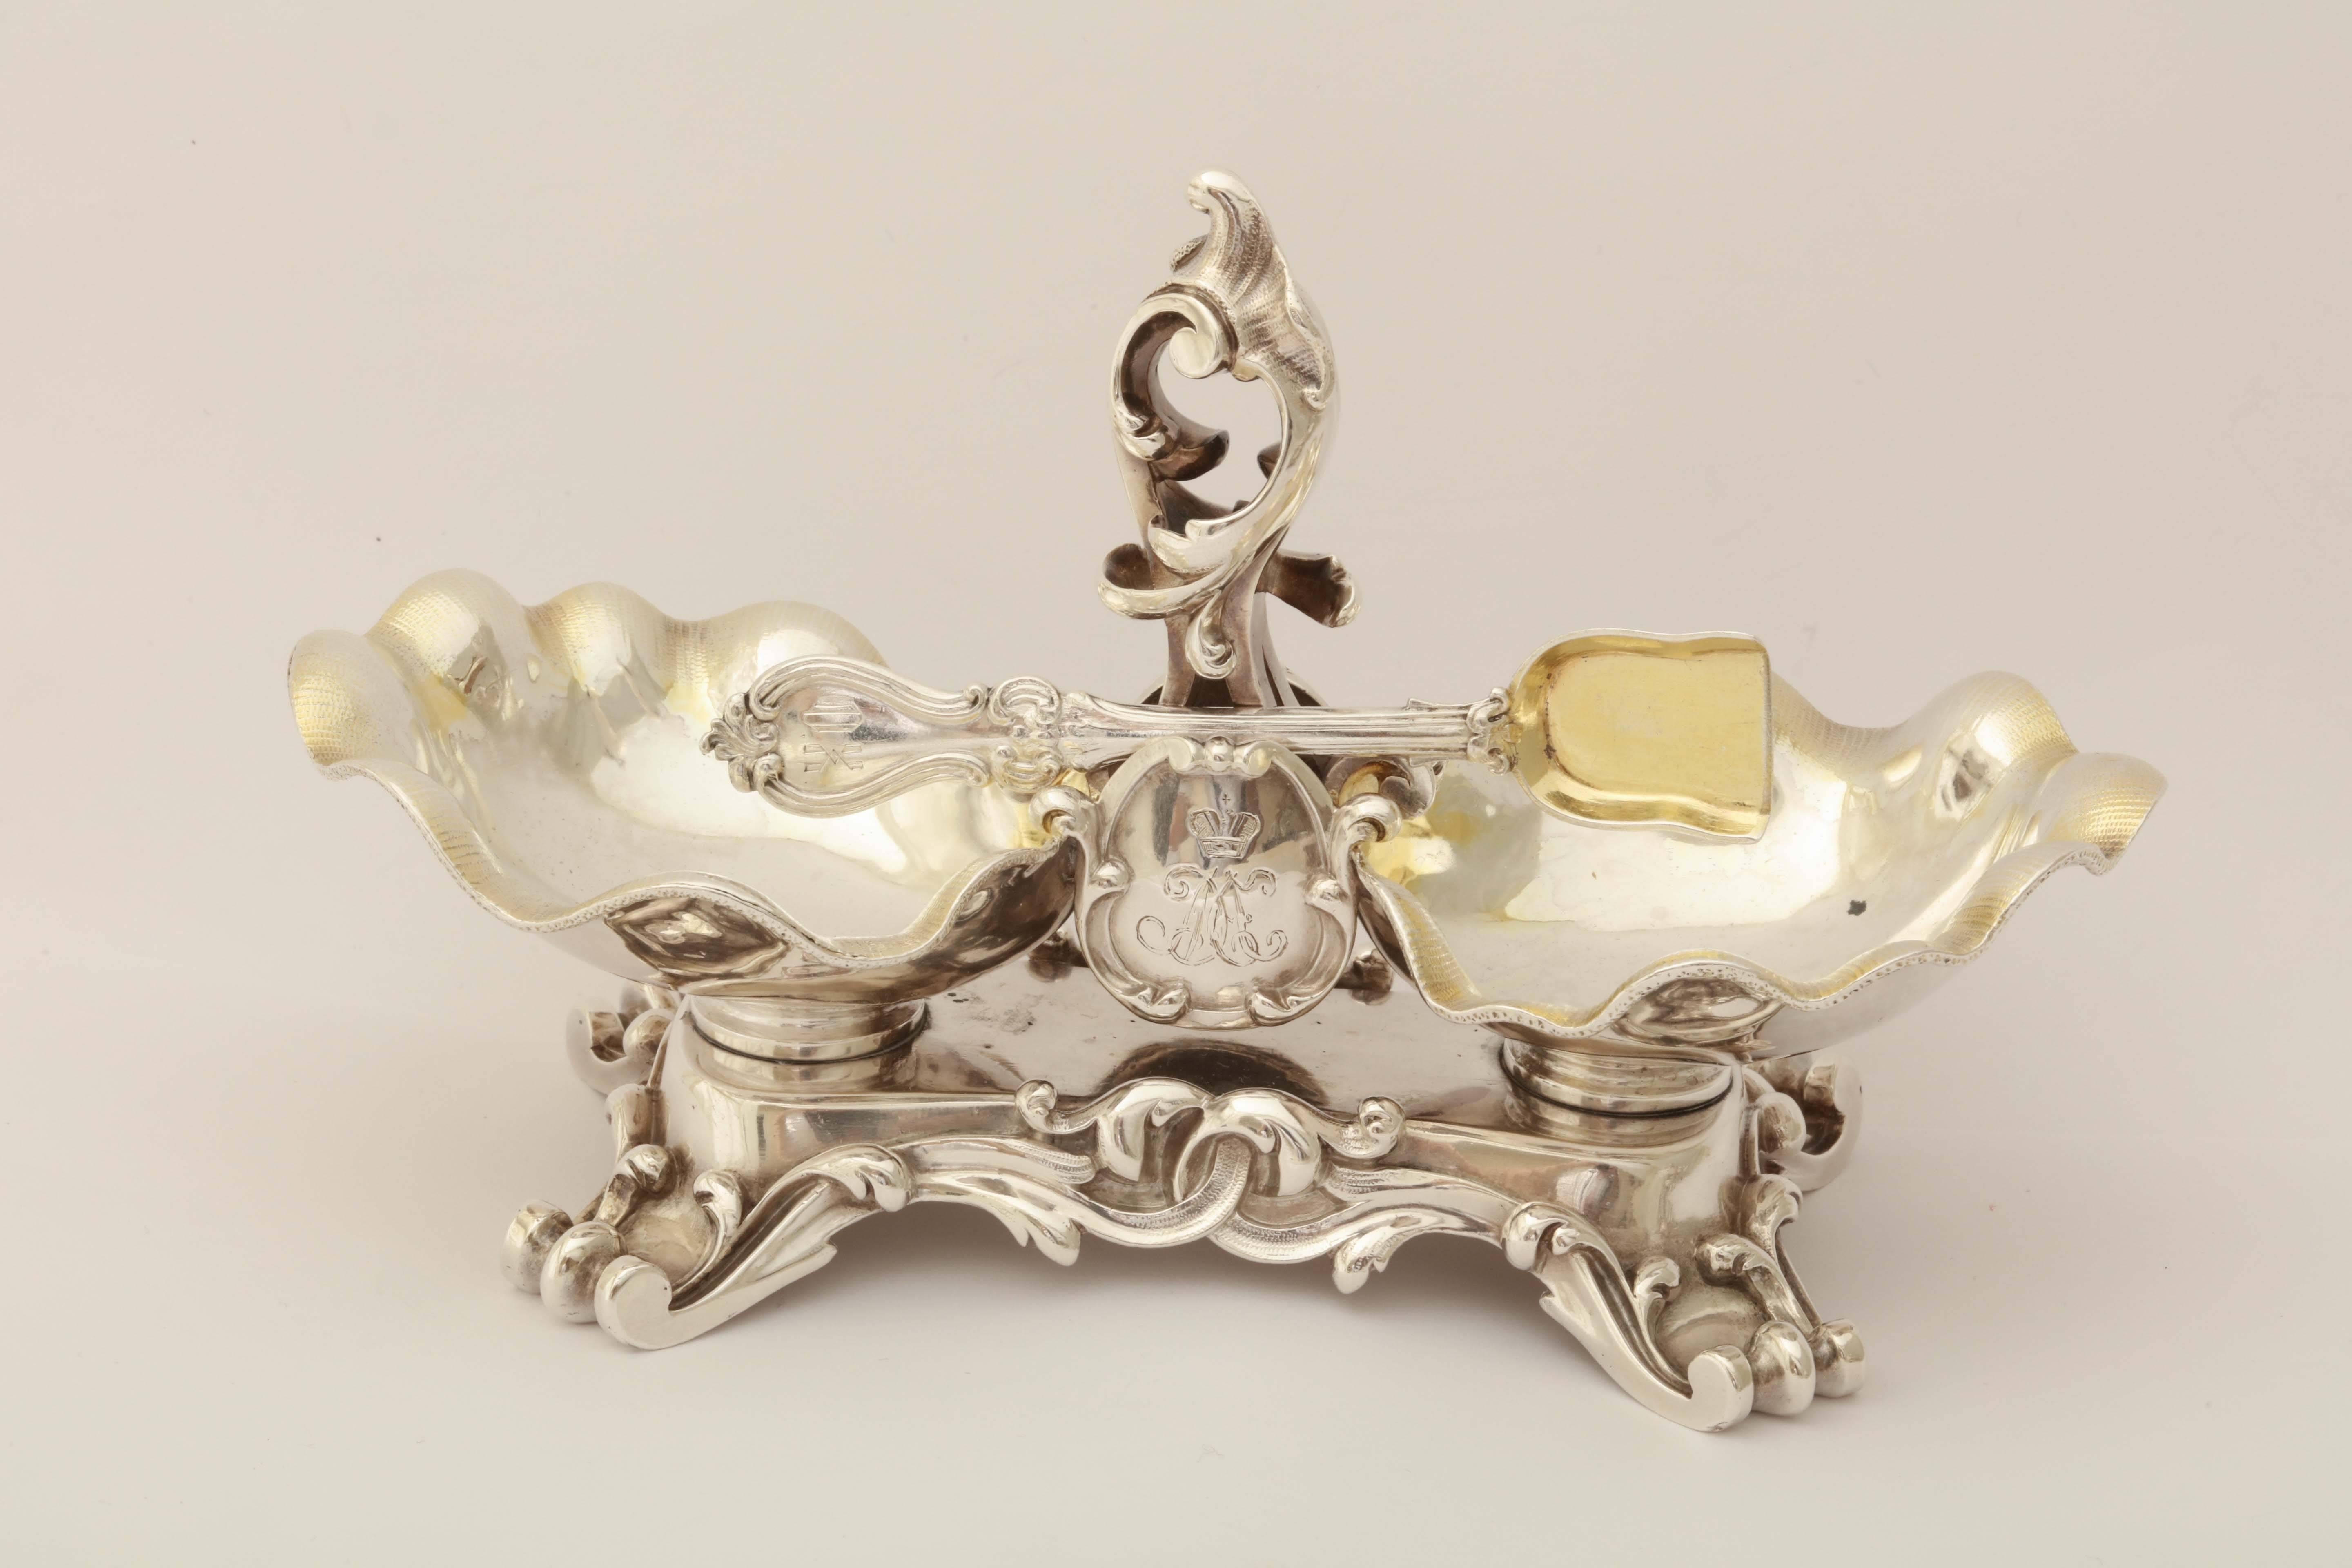 Rococo Pair of Imperial Russian Silver Salt Cellars Made for Grand Duke Michael, 1857